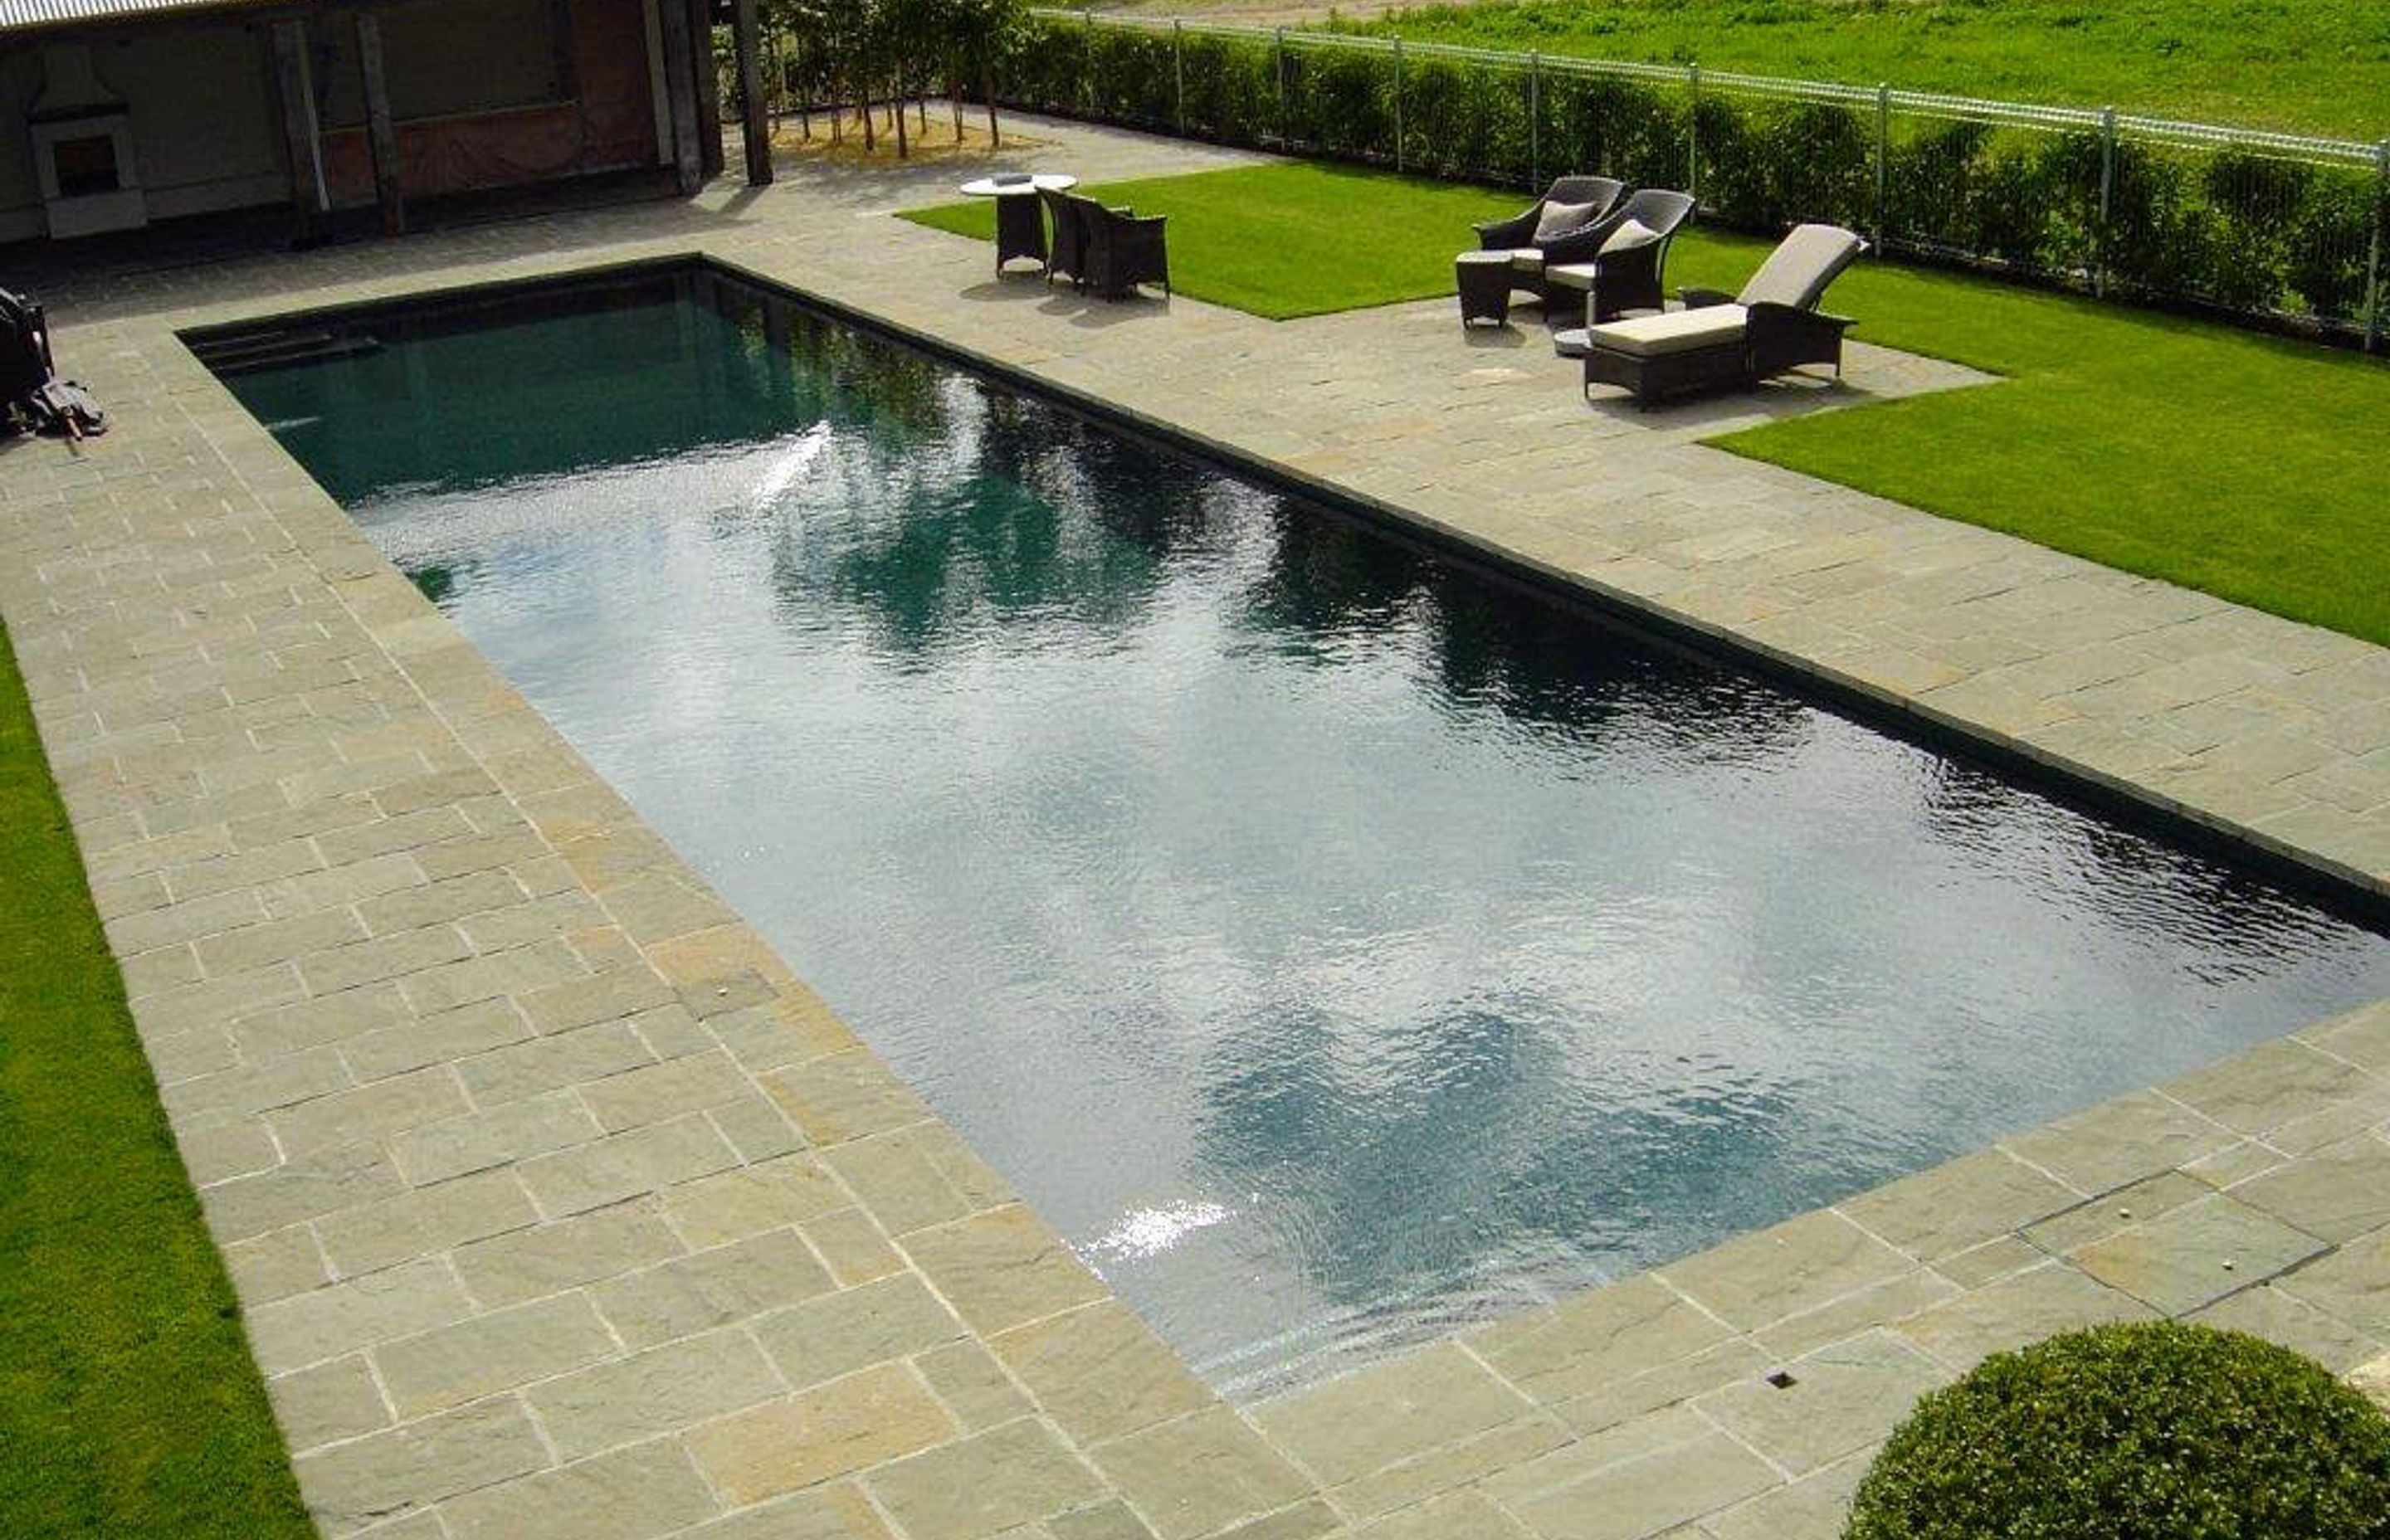 Top Five Reasons Why Natural Stone is a Sustainable Choice for Your Home